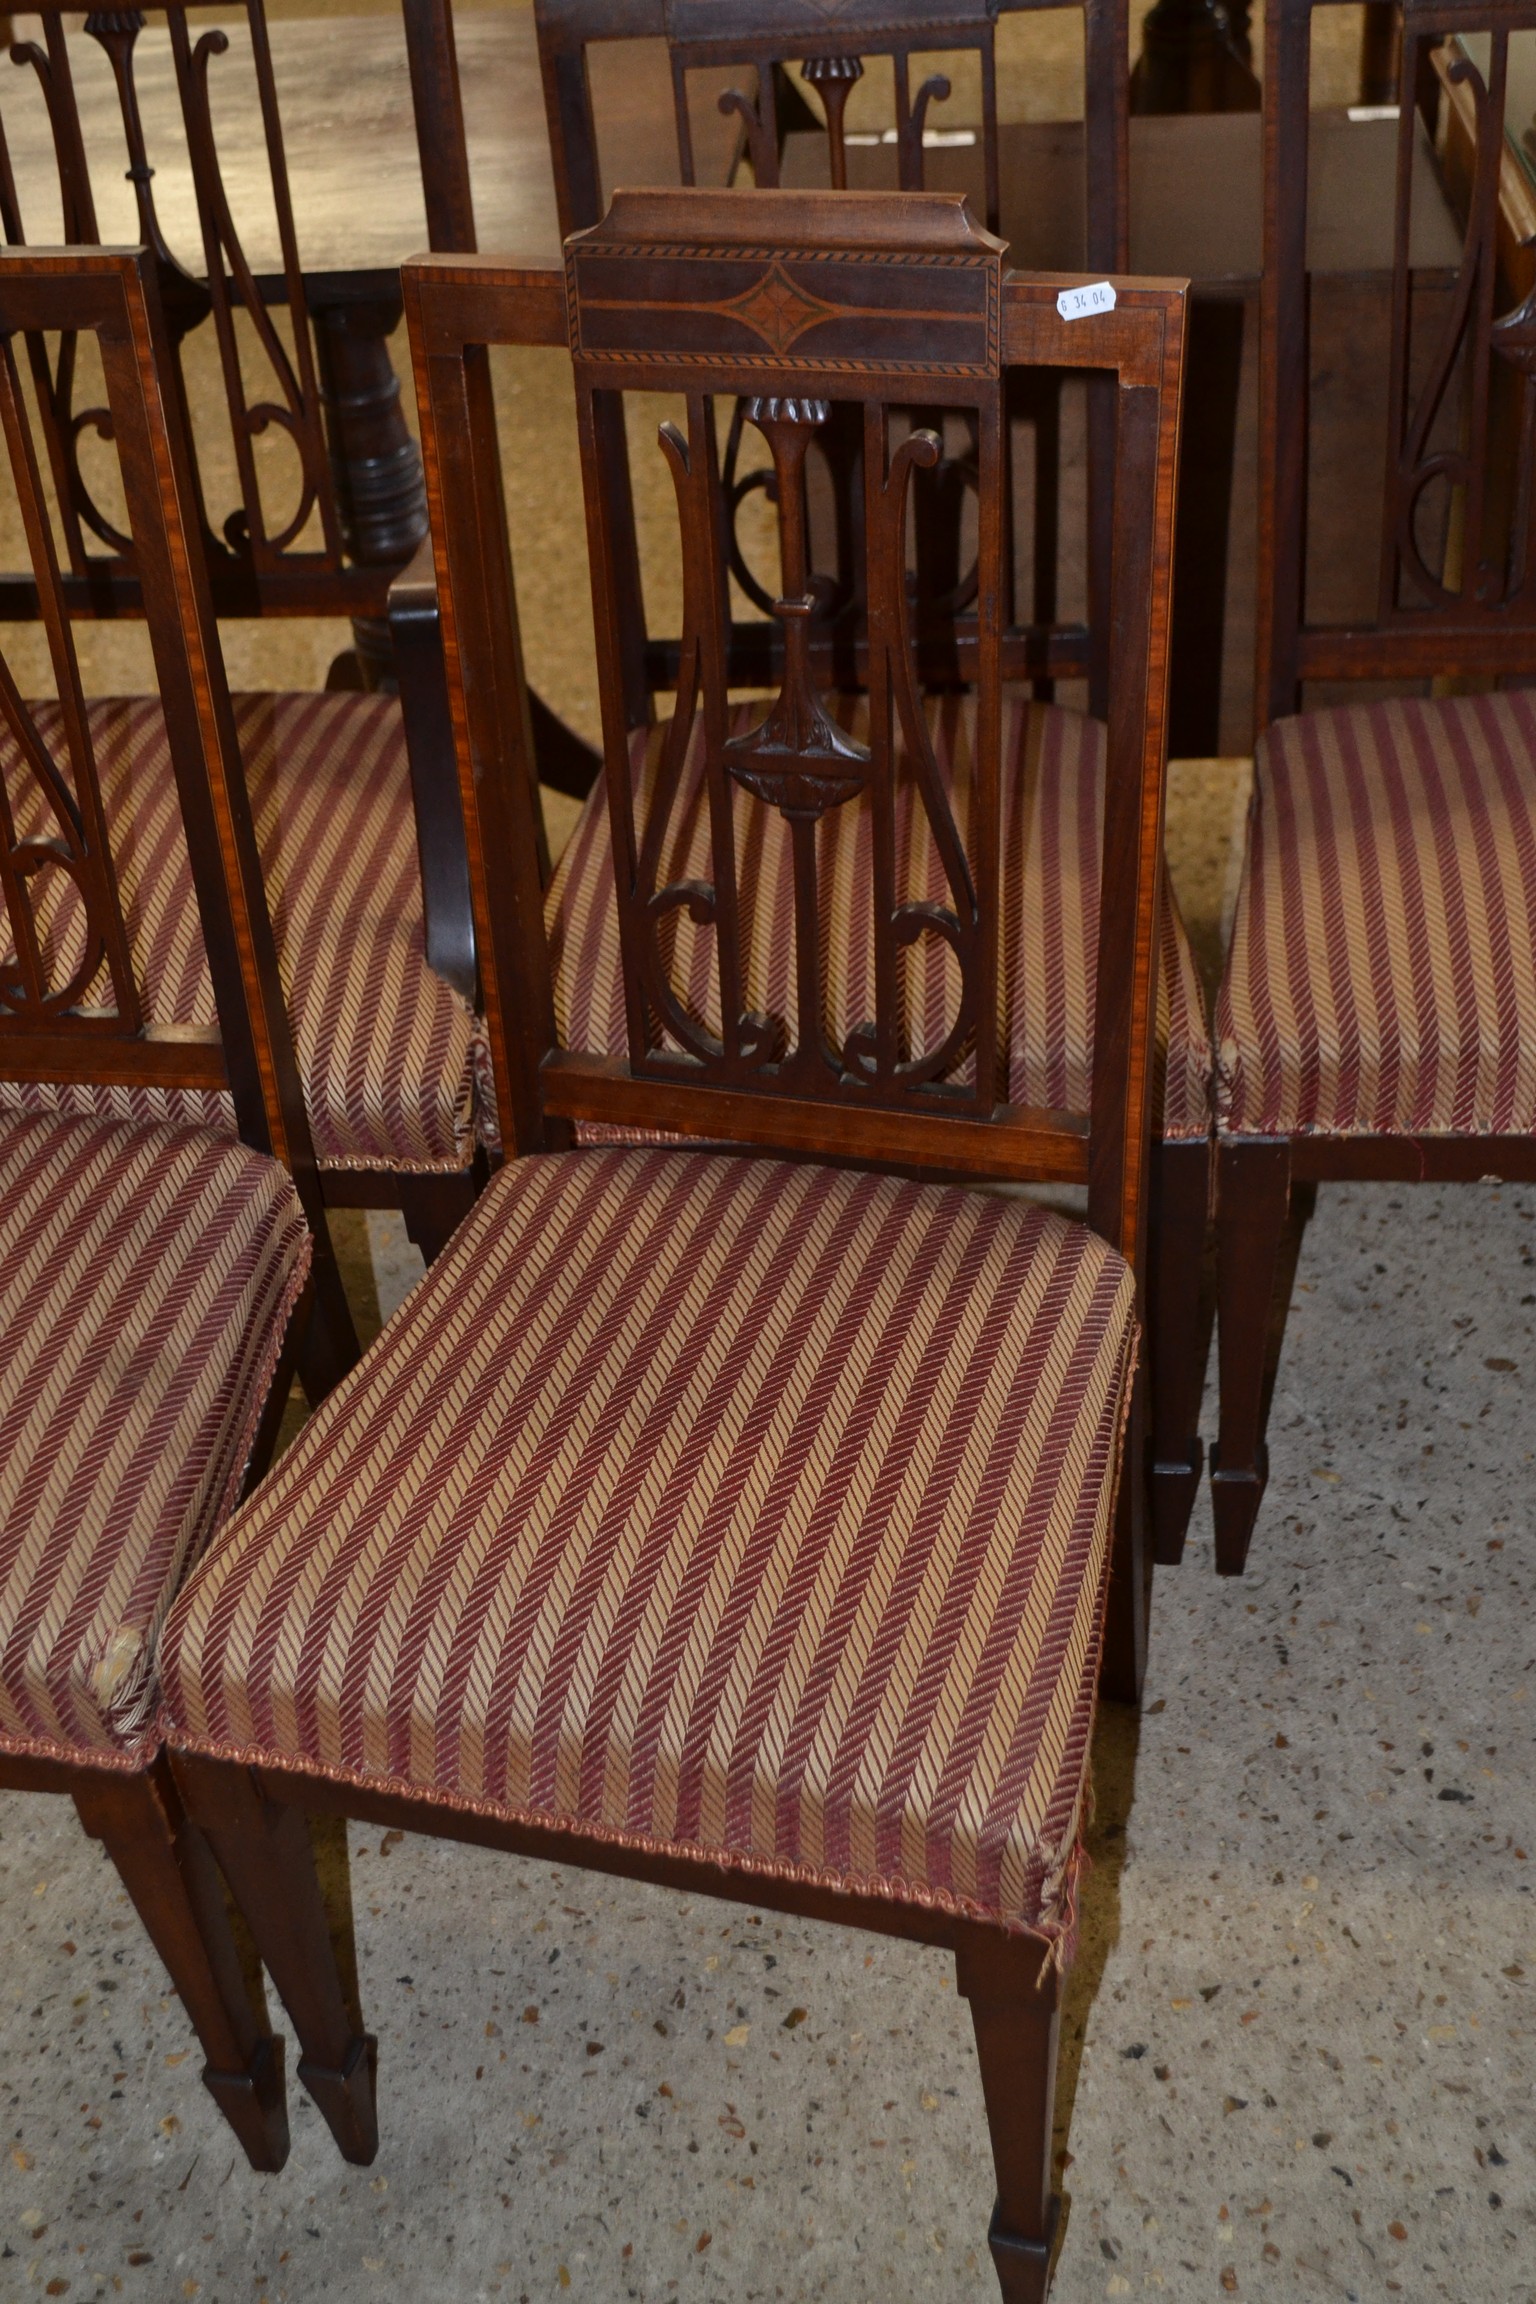 SET OF FIVE EDWARDIAN MAHOGANY DINING CHAIRS WITH STRIPED UPHOLSTERED SEATS - Image 2 of 2